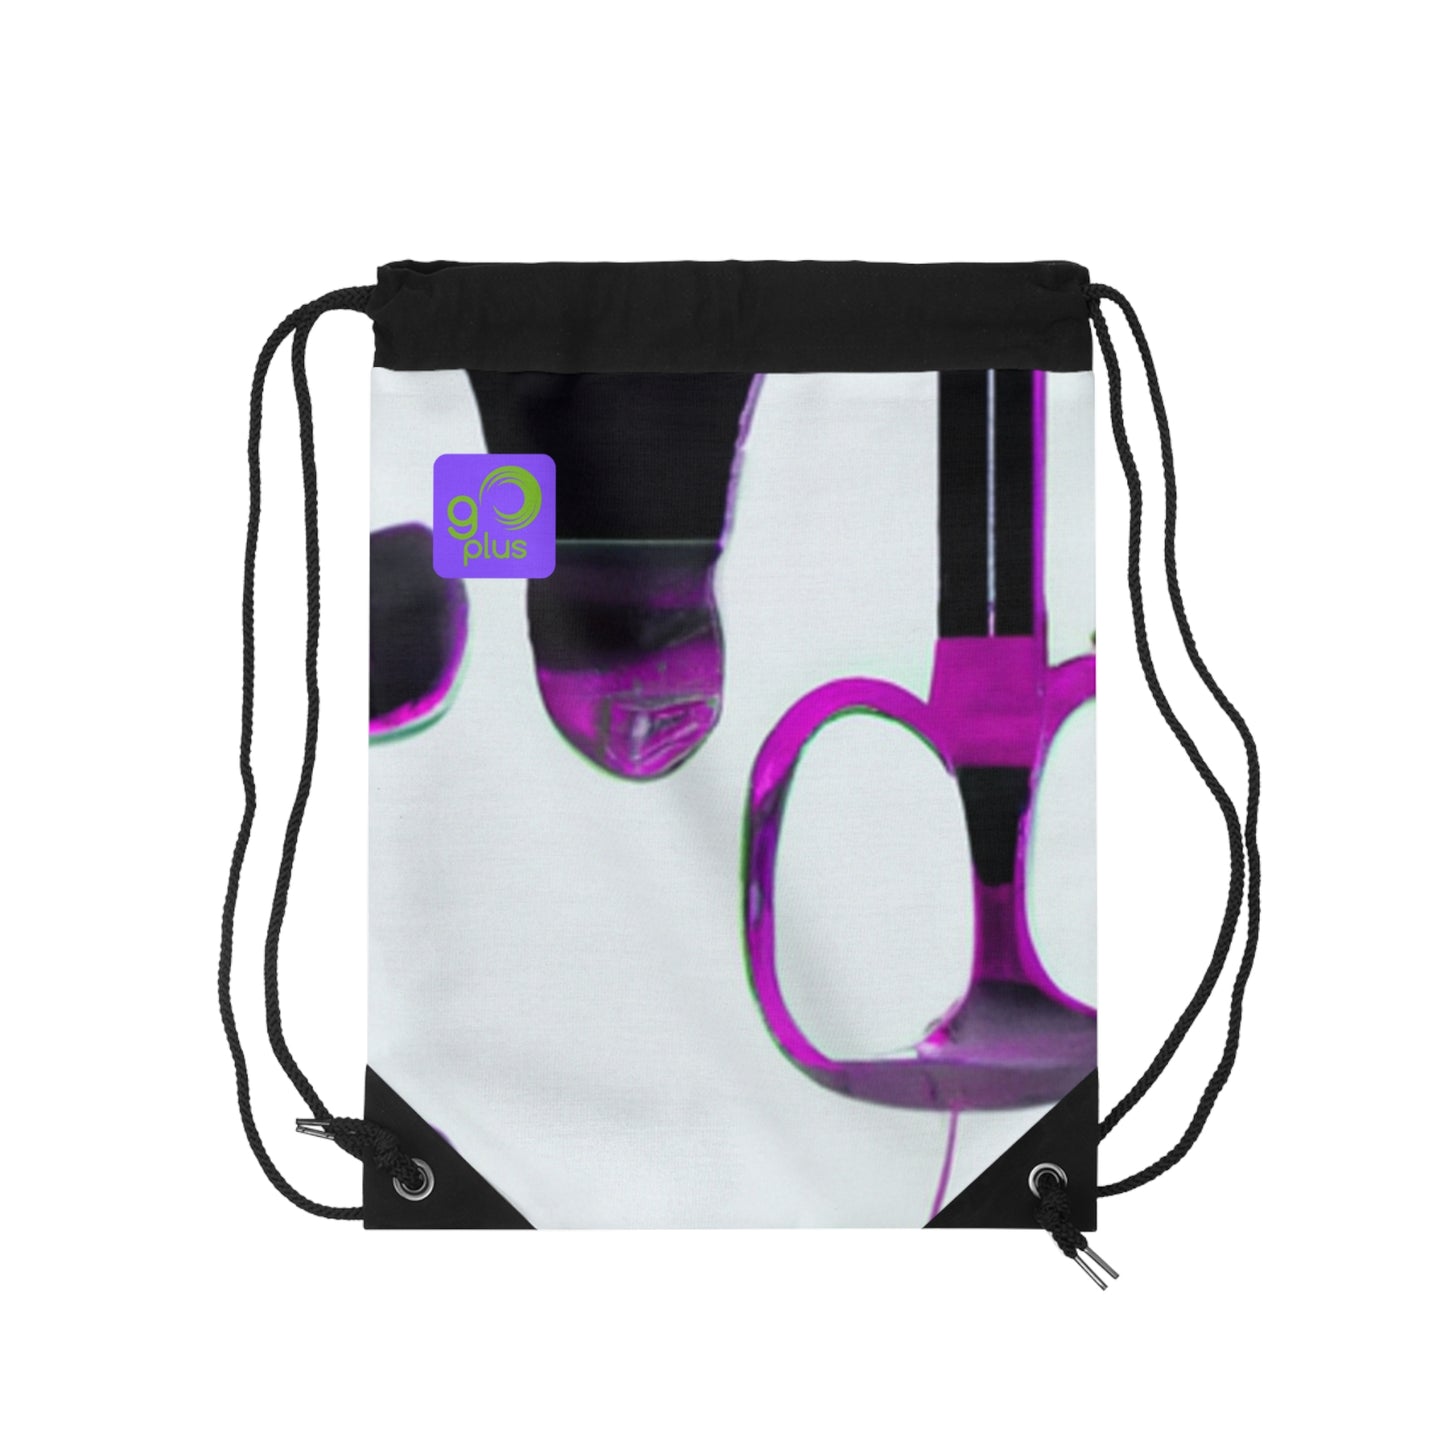 "Sports in Motion: Exploring the Colors and Shapes of Motivation" - Go Plus Drawstring Bag